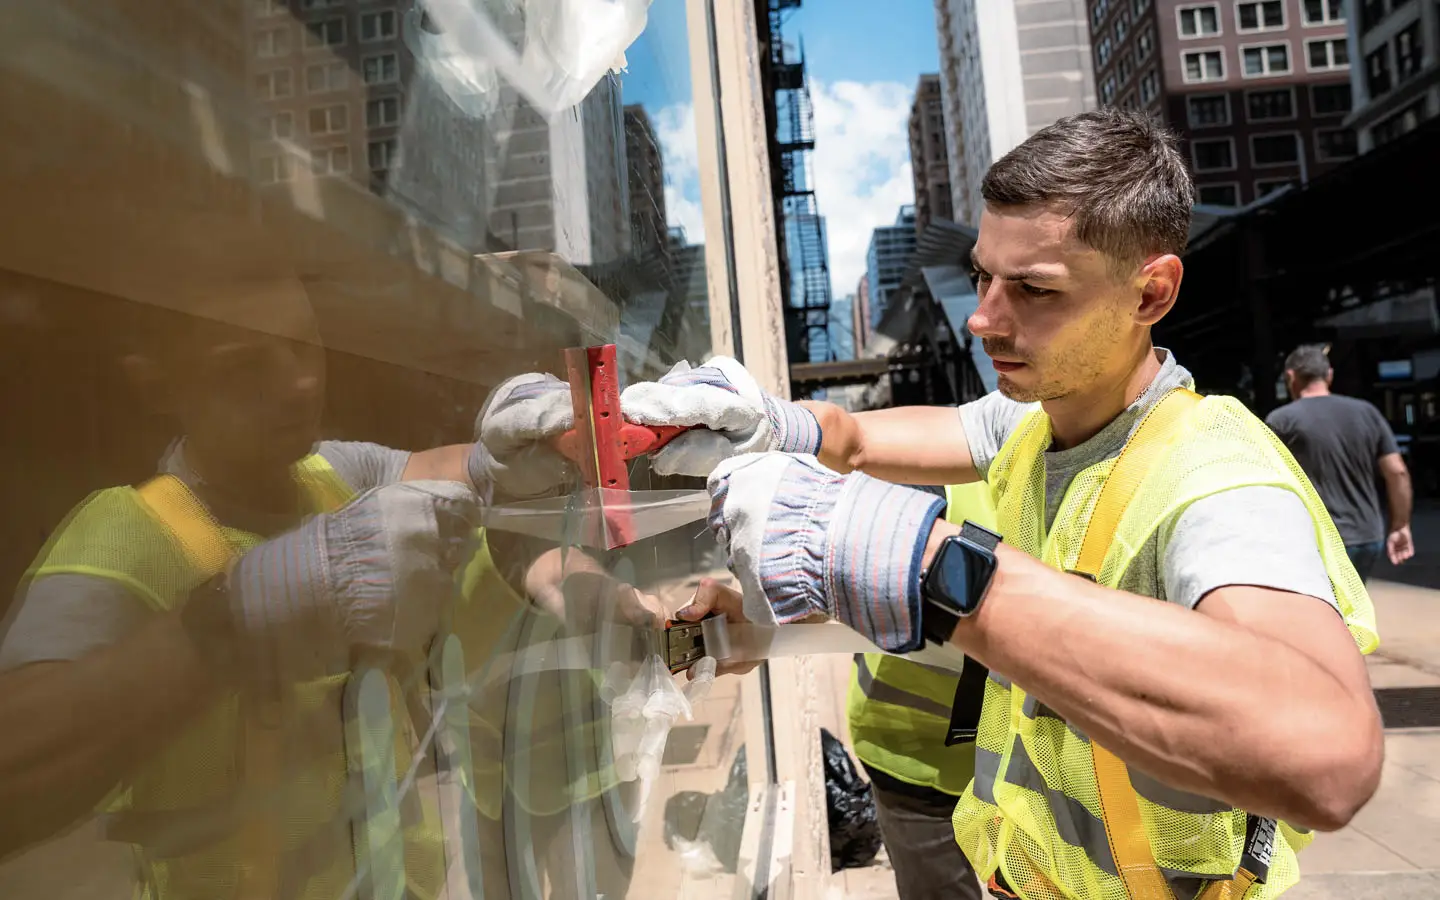 Get Commercial Window Tint Removal in Chicago: Fast, Clean, and Efficient